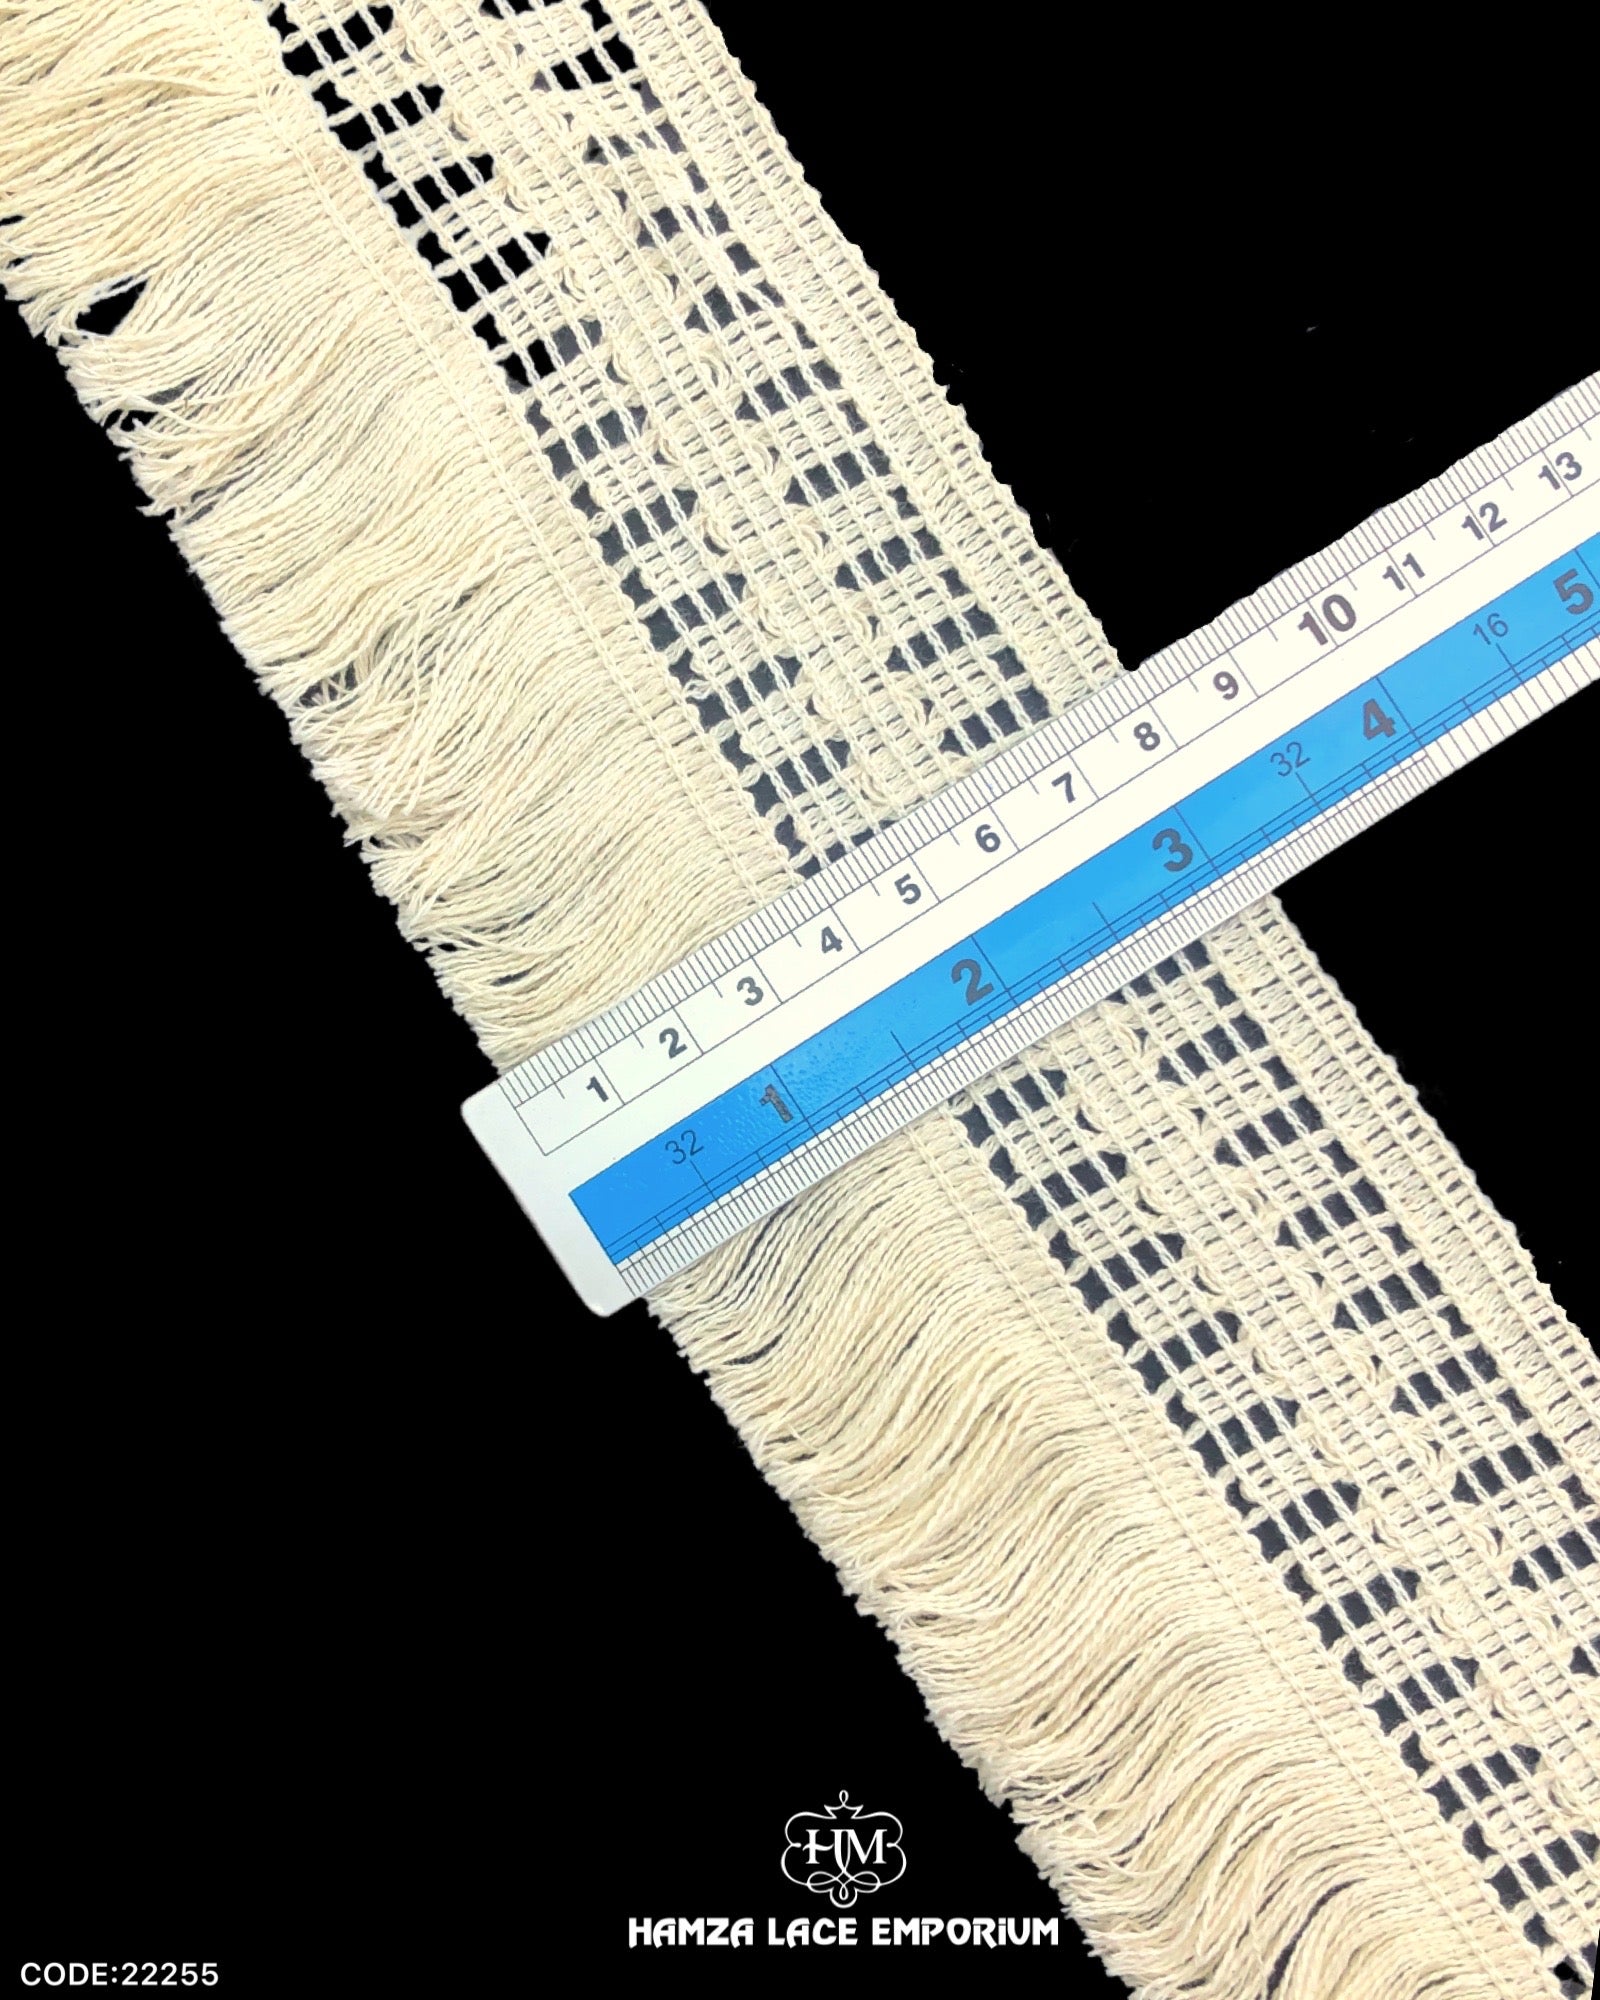 Size of the 'Edging Jhalar Lace 22255' is shown with the help of a ruler